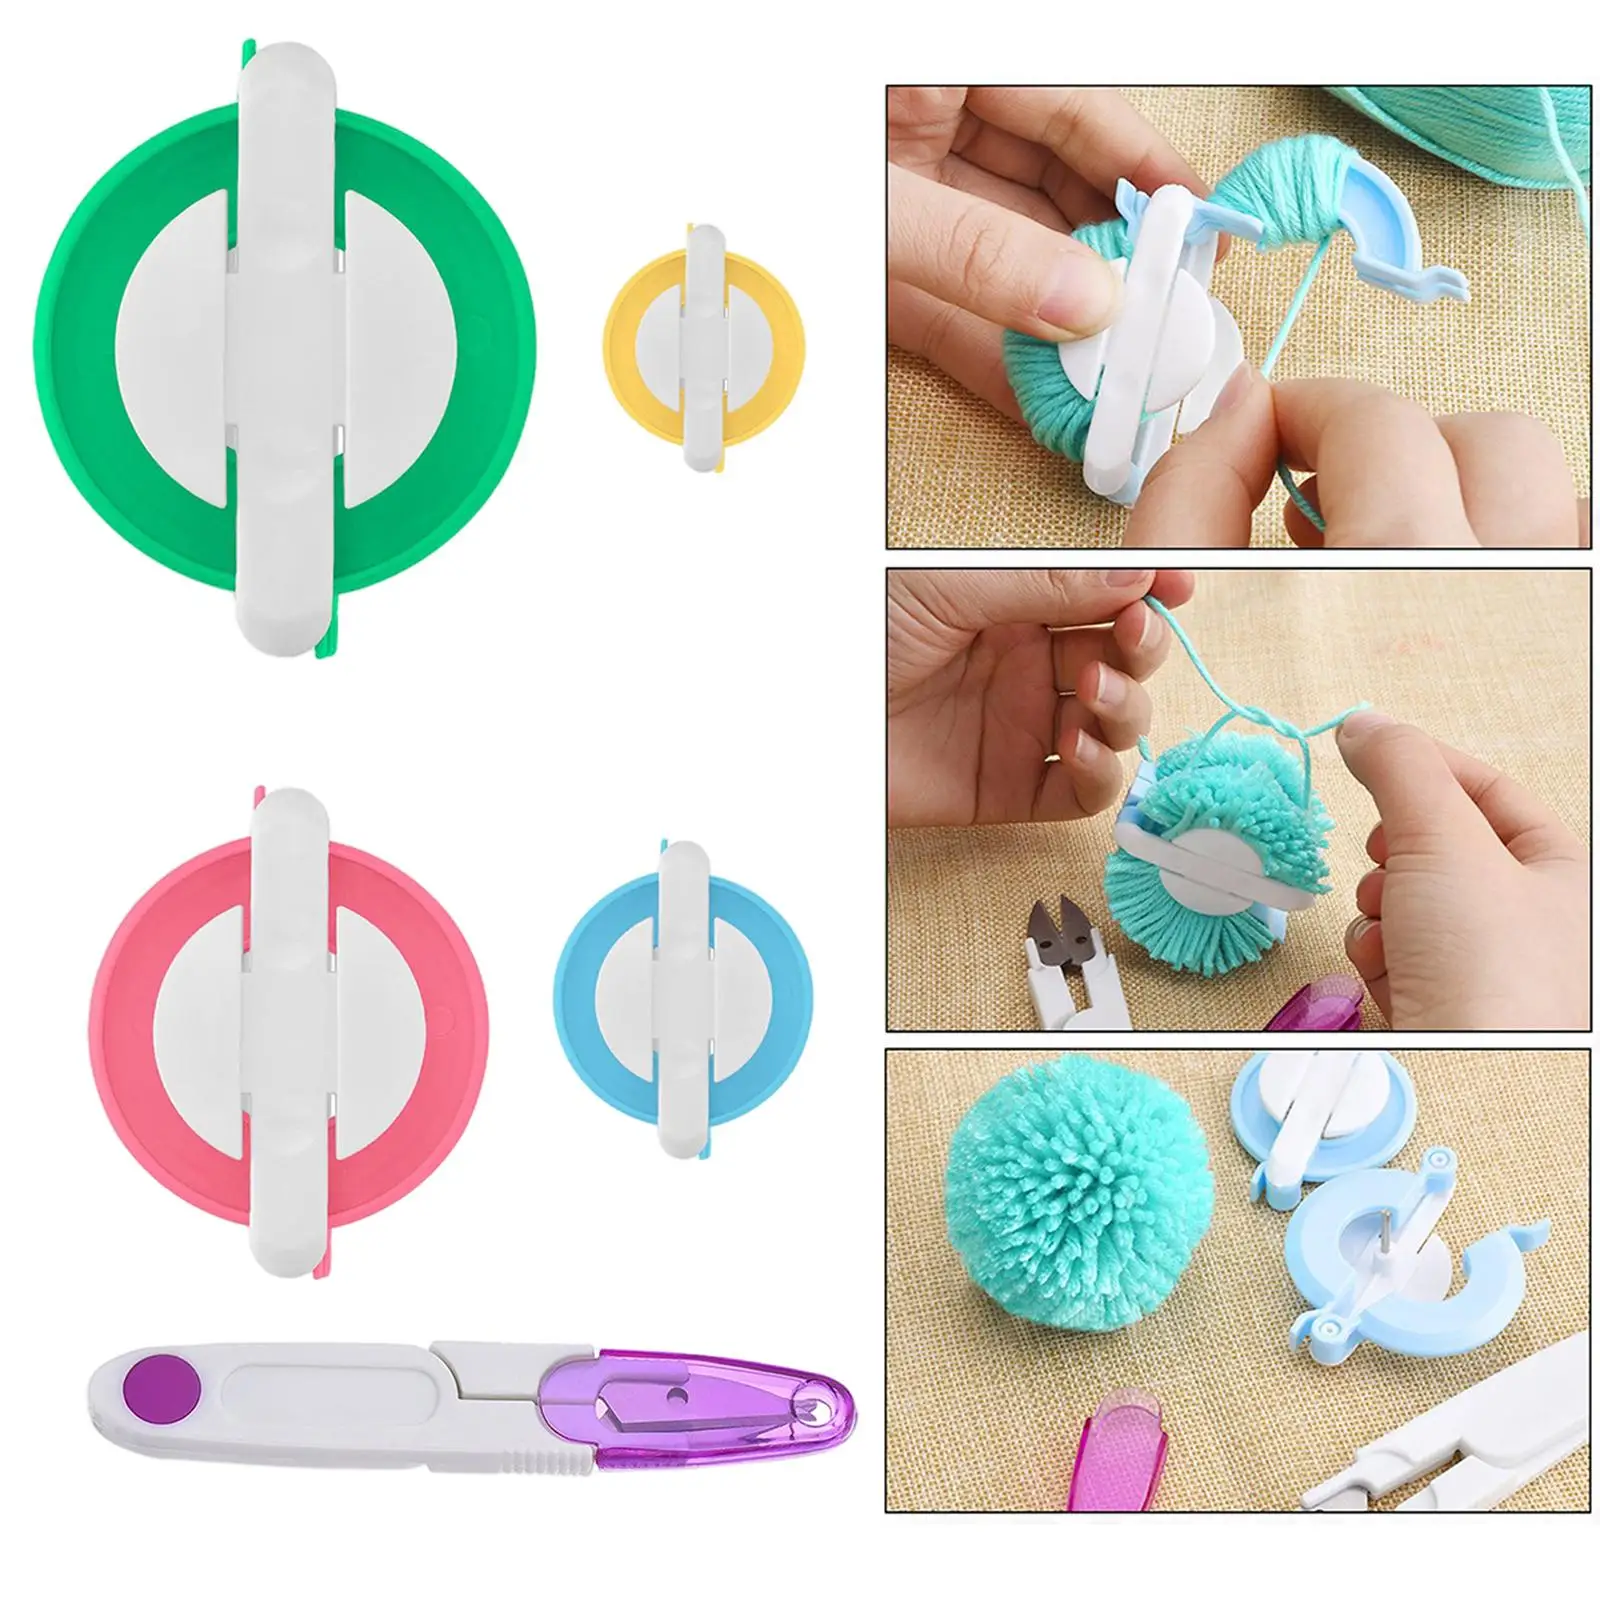 Pompom Maker 4 Sizes Pom pom Makers for Fluff Ball Weaver Needle Craft DIY Wool Knitting Tool Set Decoration+12PS Acrylic Yarn+10PS Knitting Stitch Markers+10PS Plastic Needles+1PS Scissors 37a 